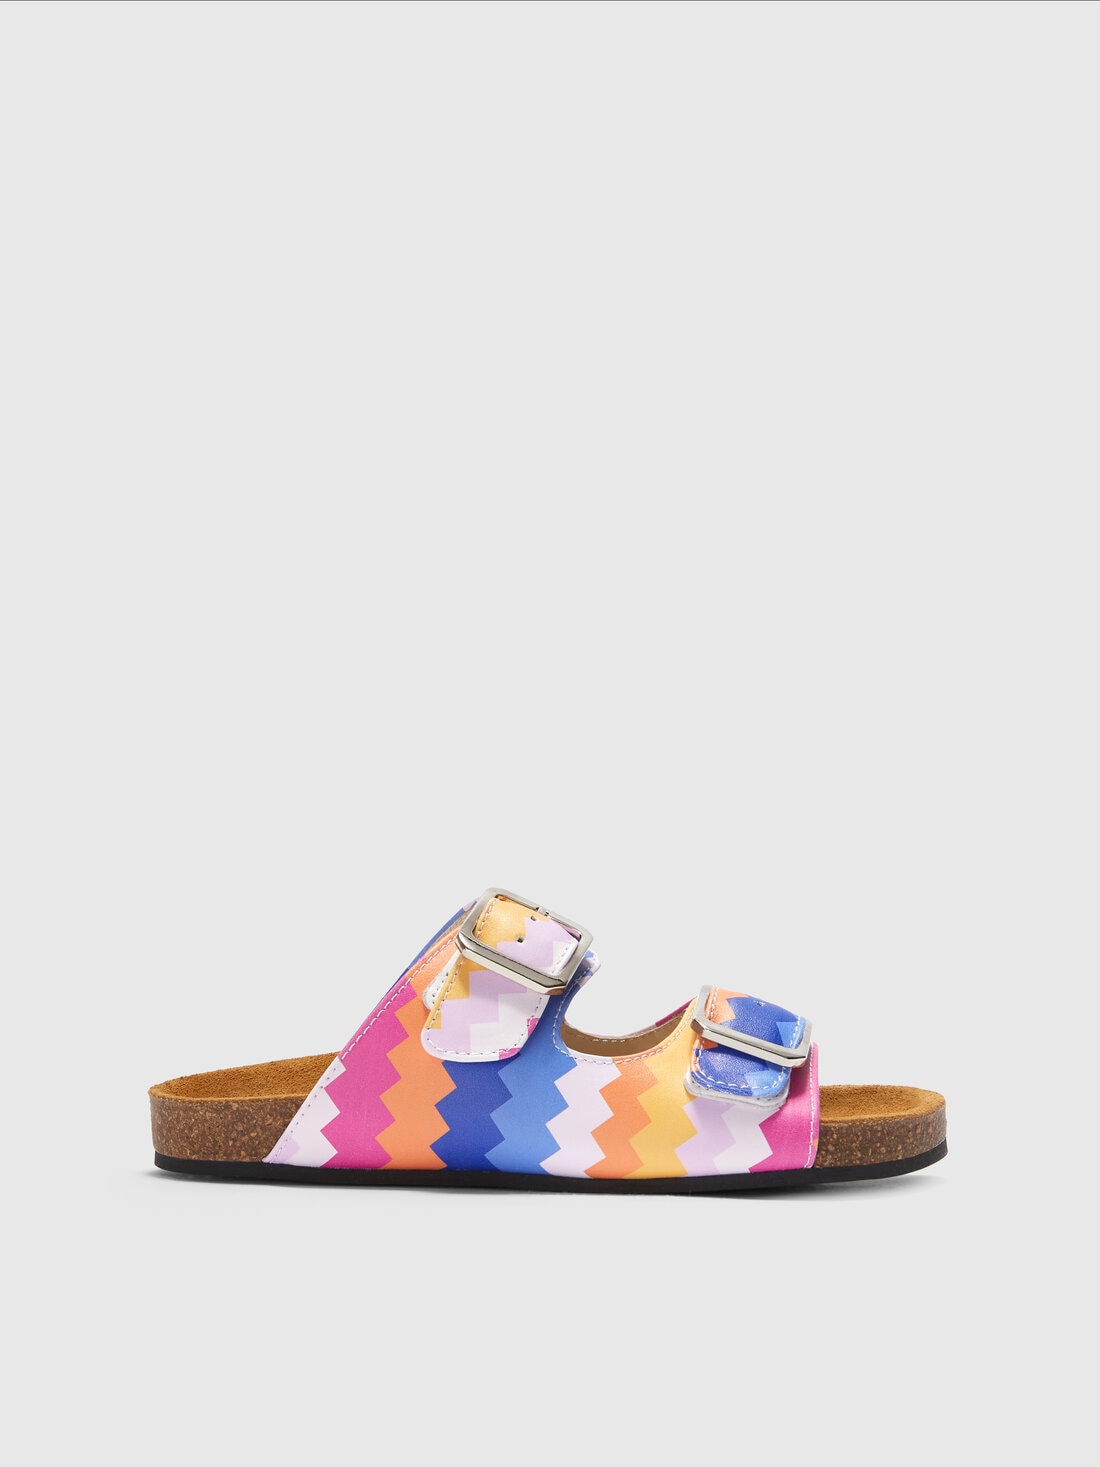 Sandals with double straps with chevron pattern, Multicoloured  - KS24SY01BV00FWSM923 - 0